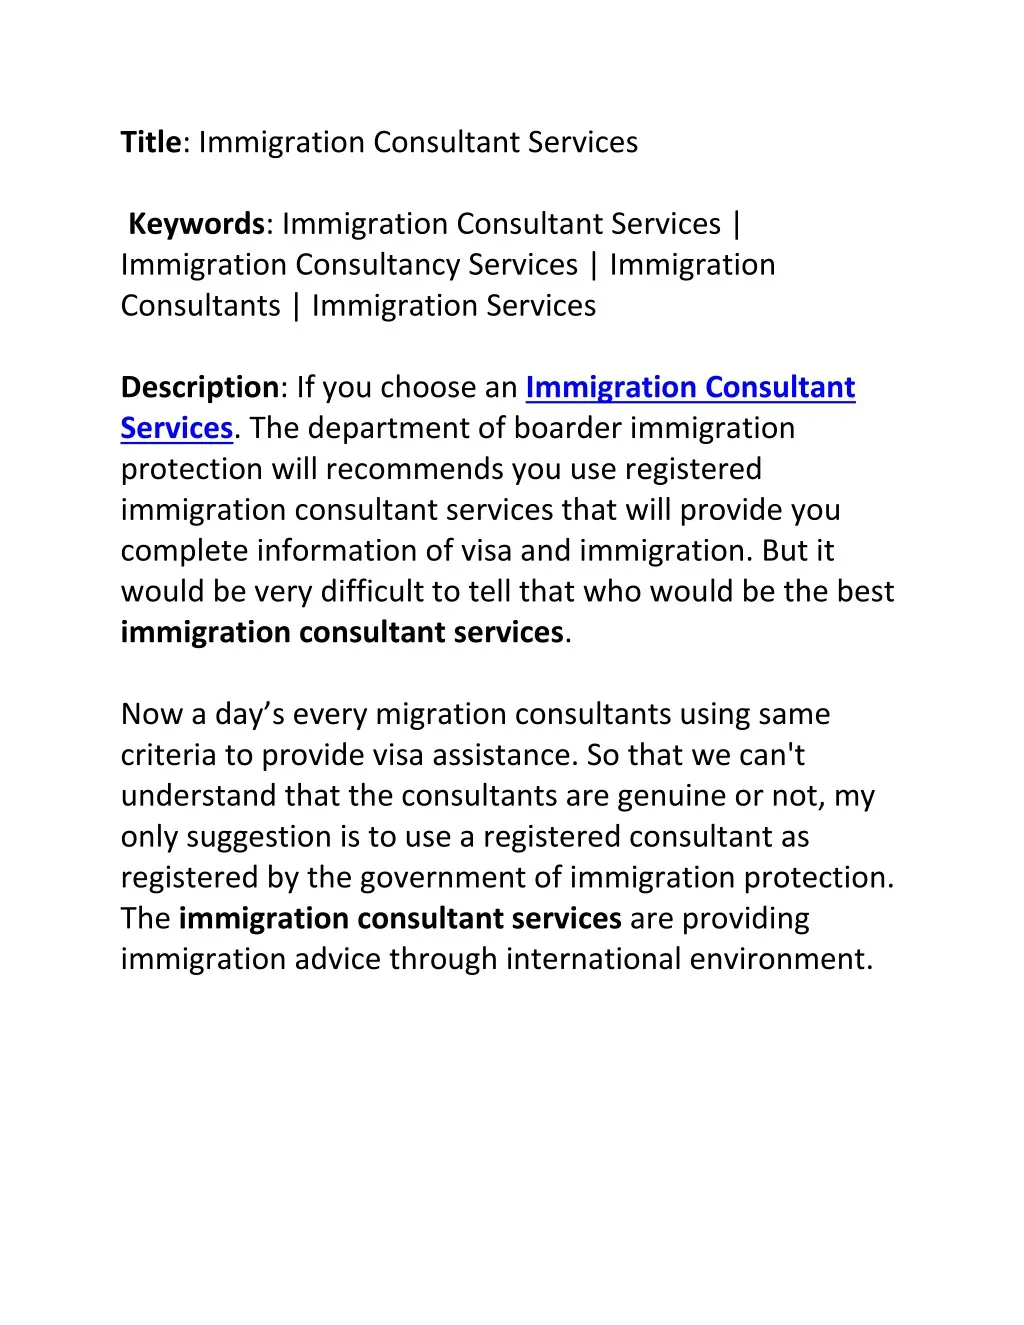 PPT Immigration Consultant Services PowerPoint Presentation free